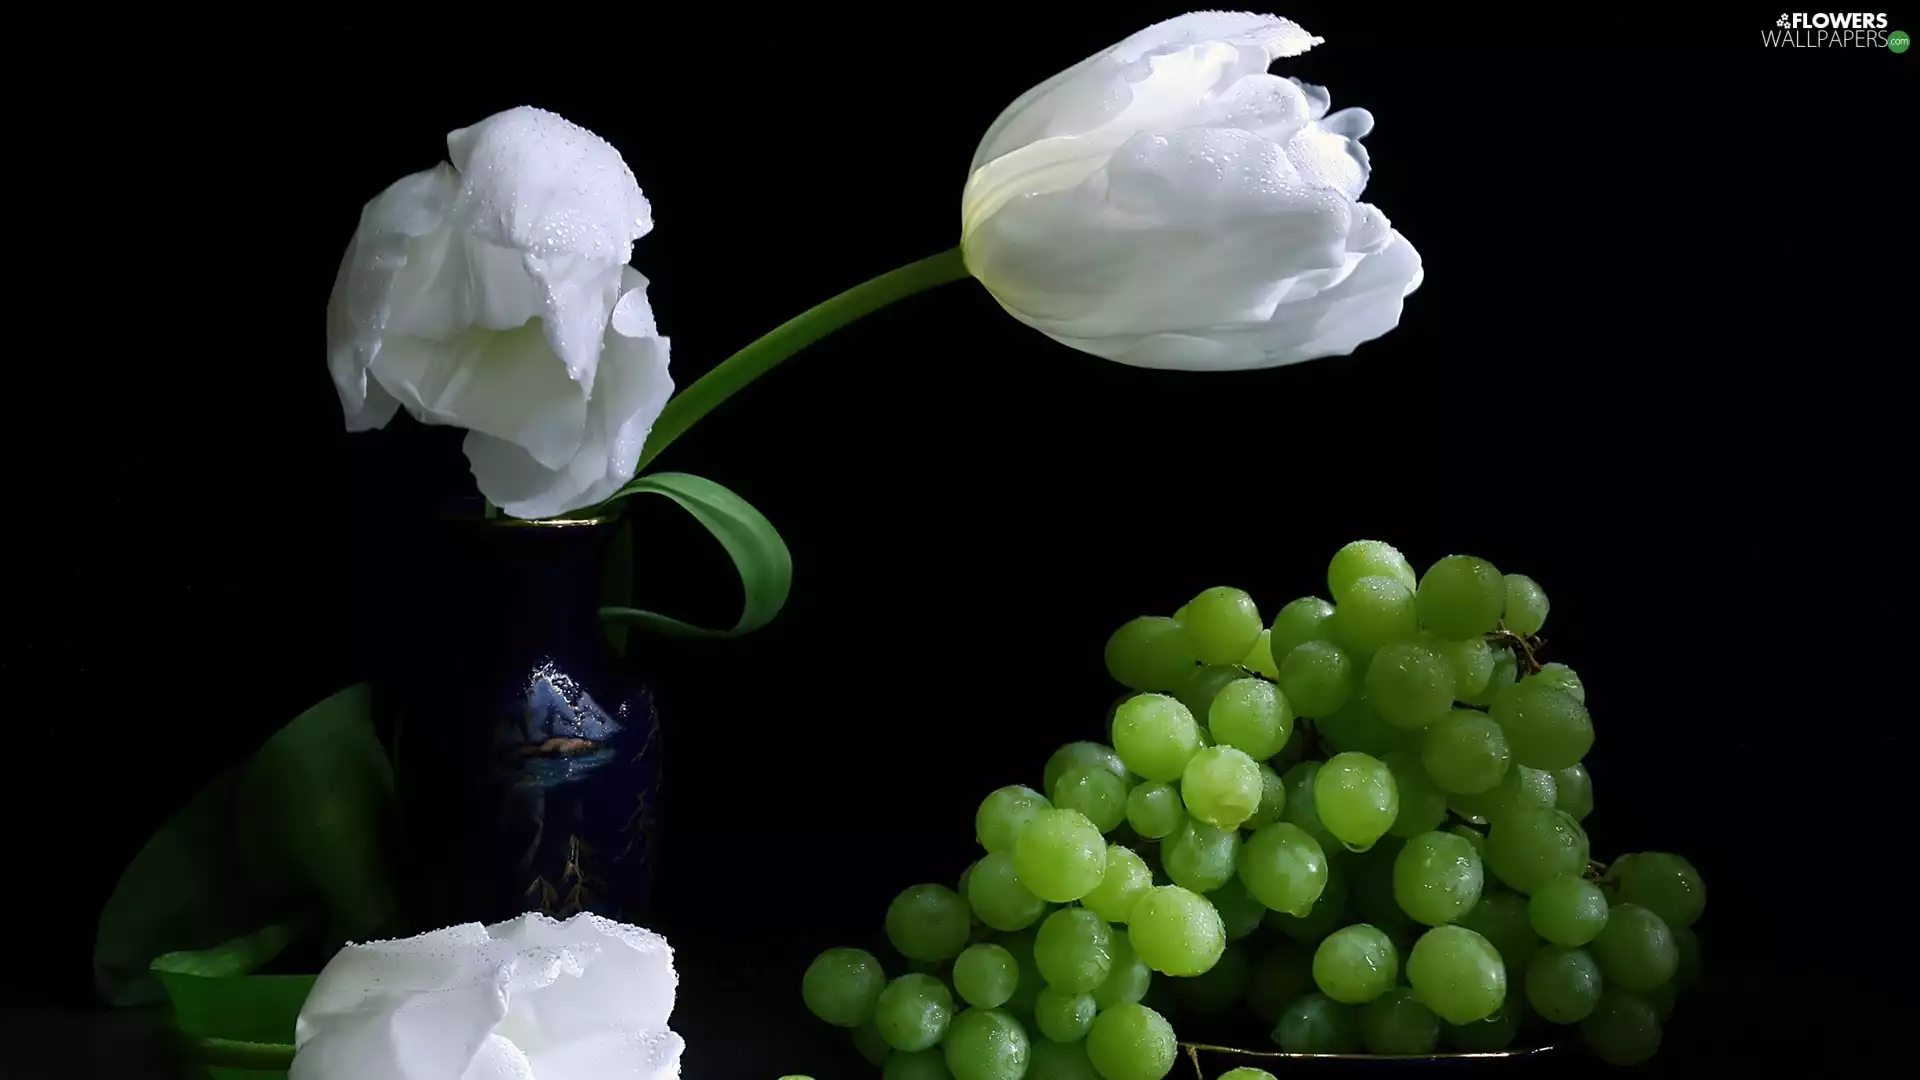 White, green ones, Grapes, Tulips